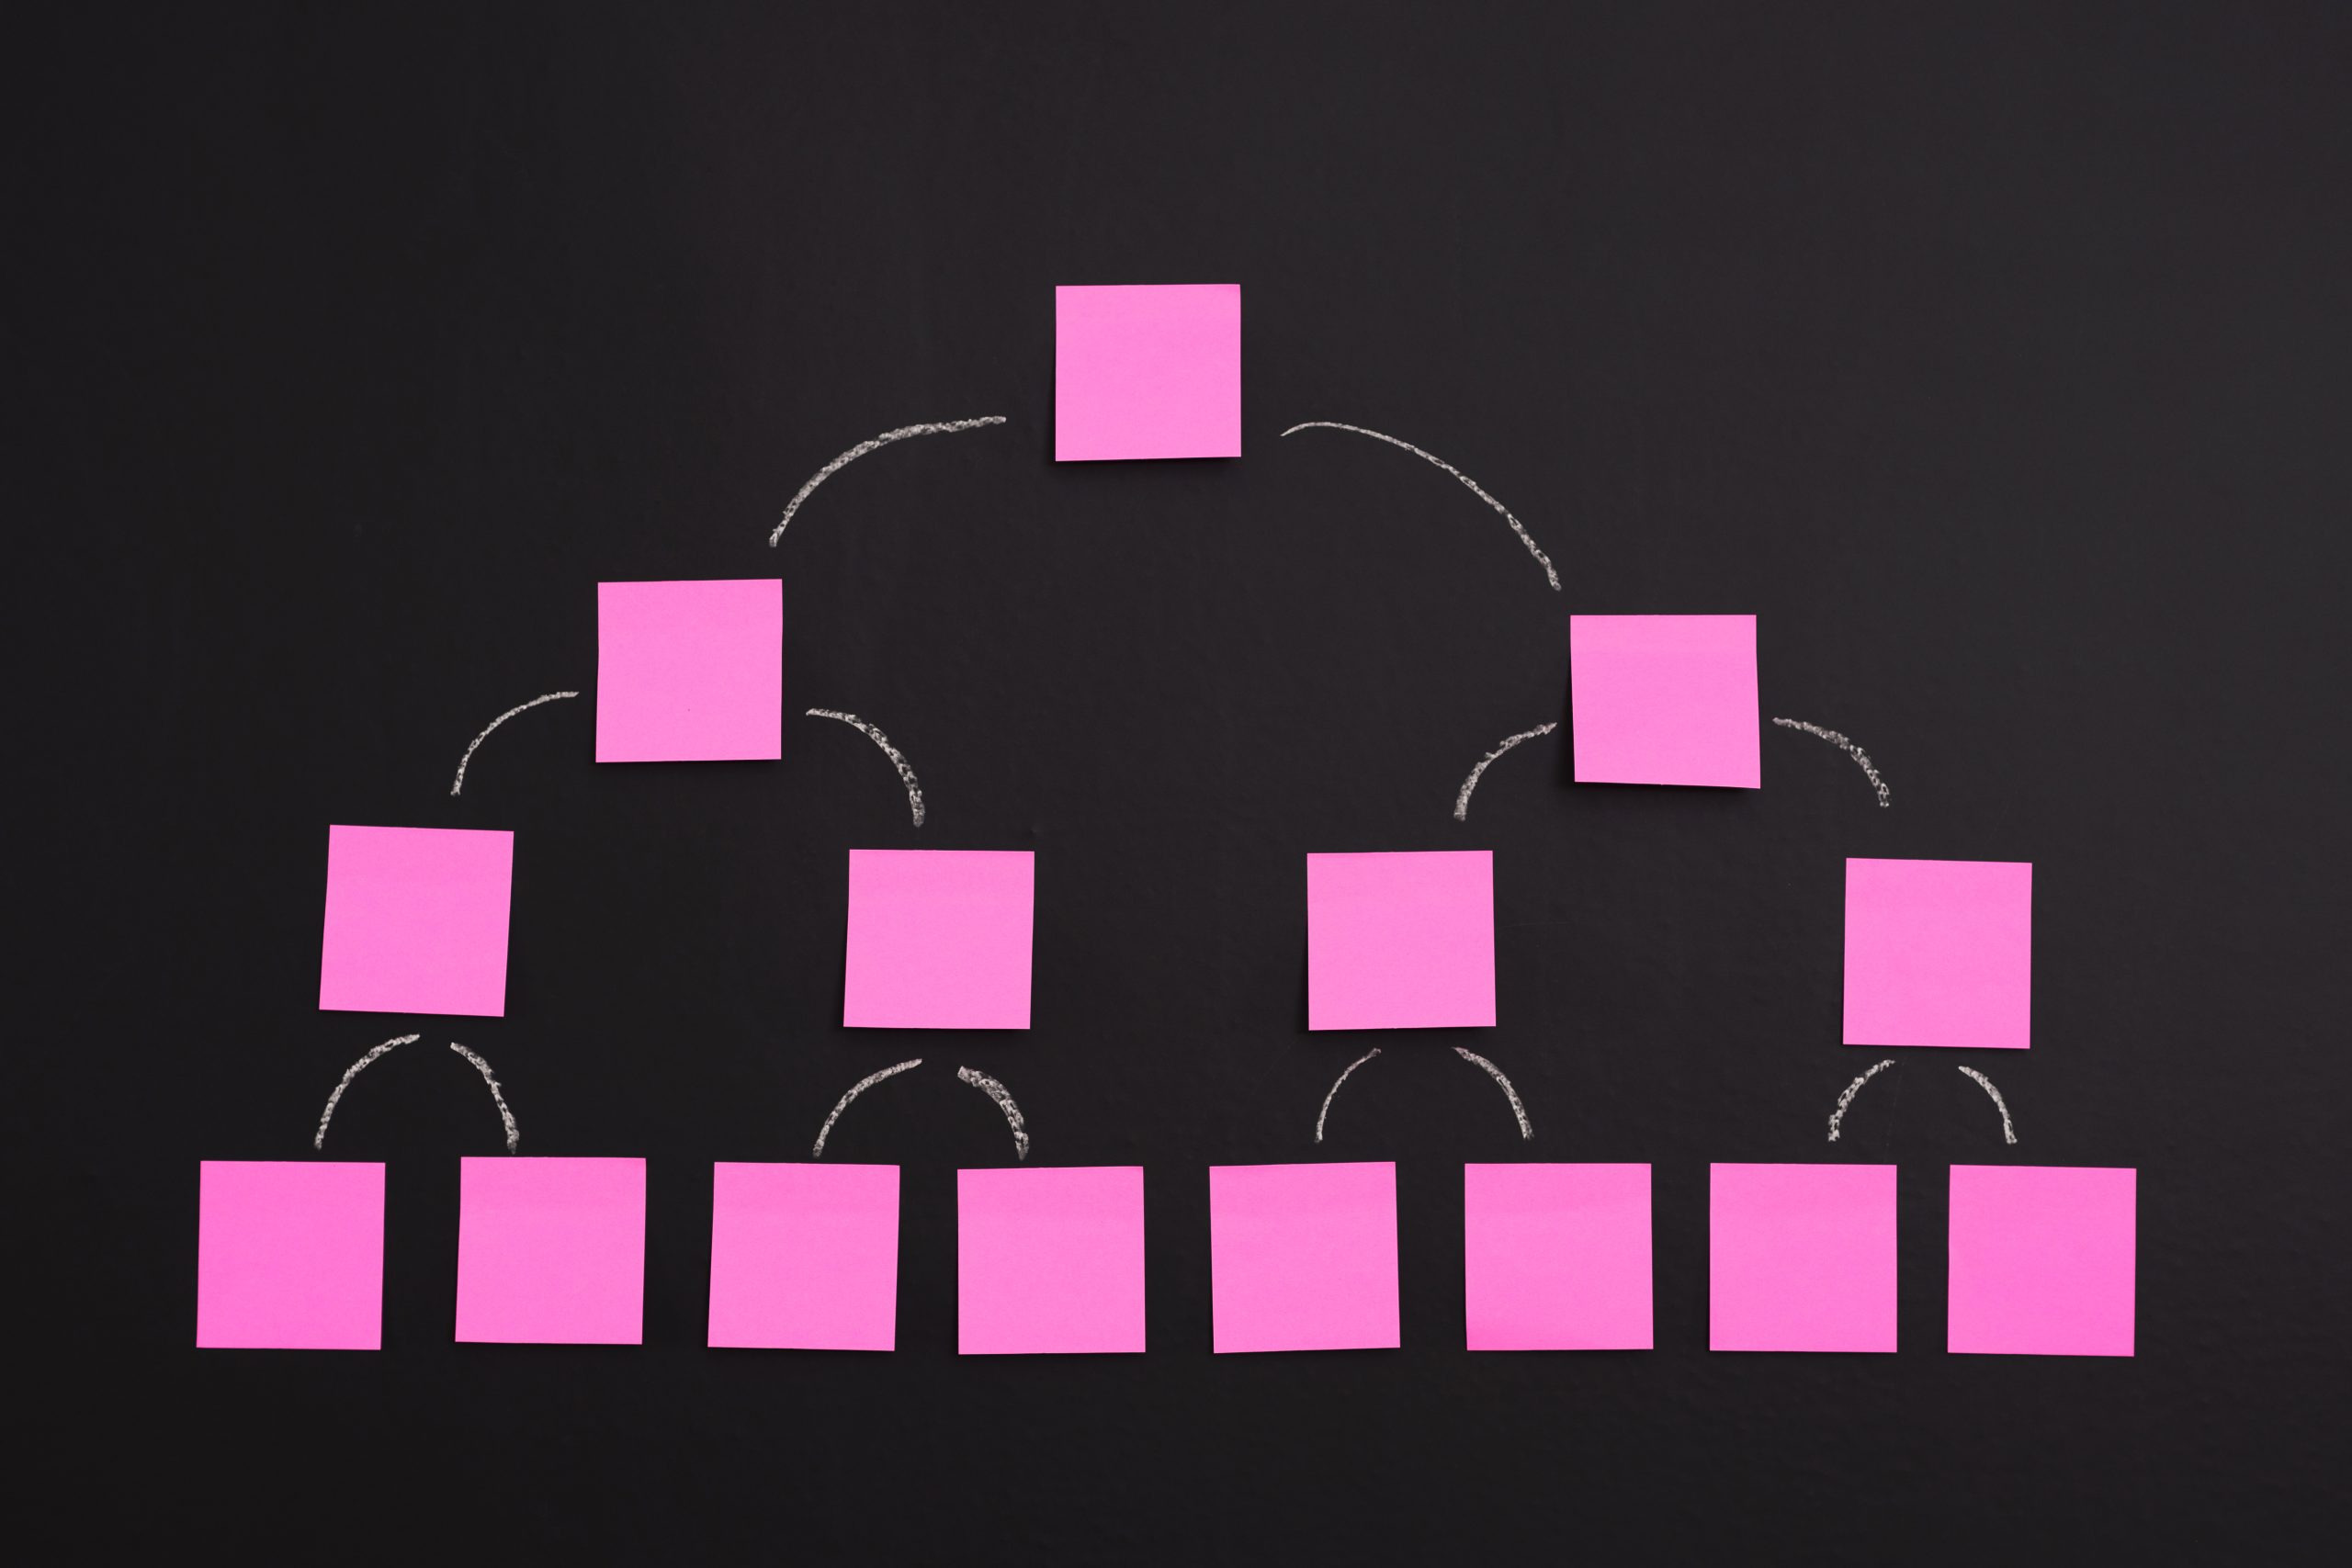 An image of sticky noted arranged in a hierarchy